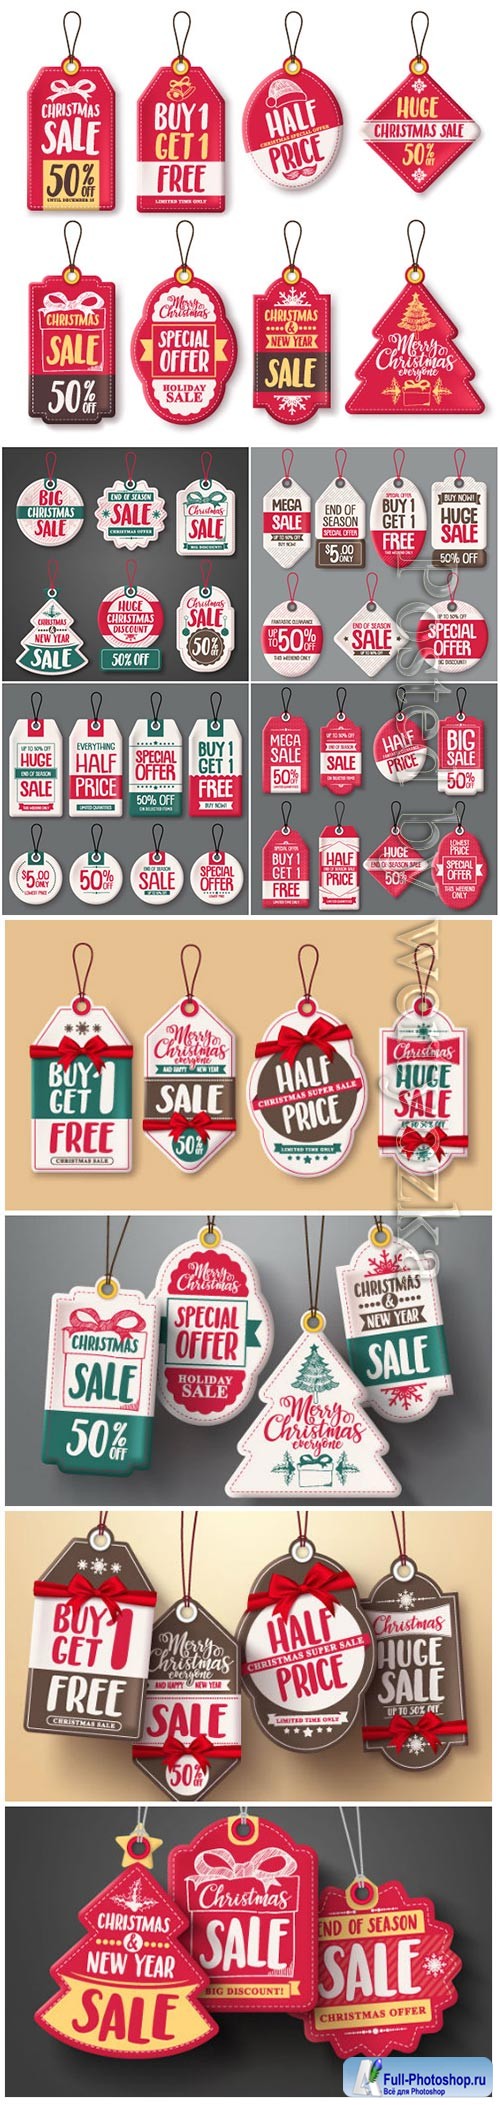 Christmas hanging sale tags vector set in white color with different shapes and greetings